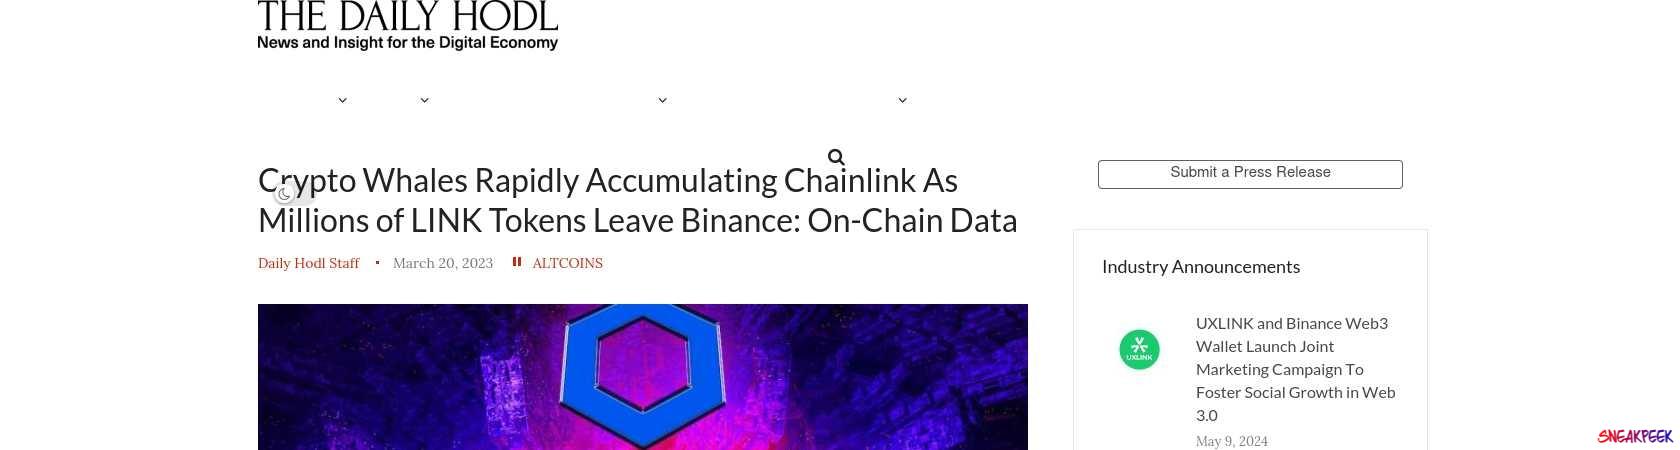 Read the full Article:  ⭲ Crypto Whales Rapidly Accumulating Chainlink As Millions of LINK Tokens Leave Binance: On-Chain Data